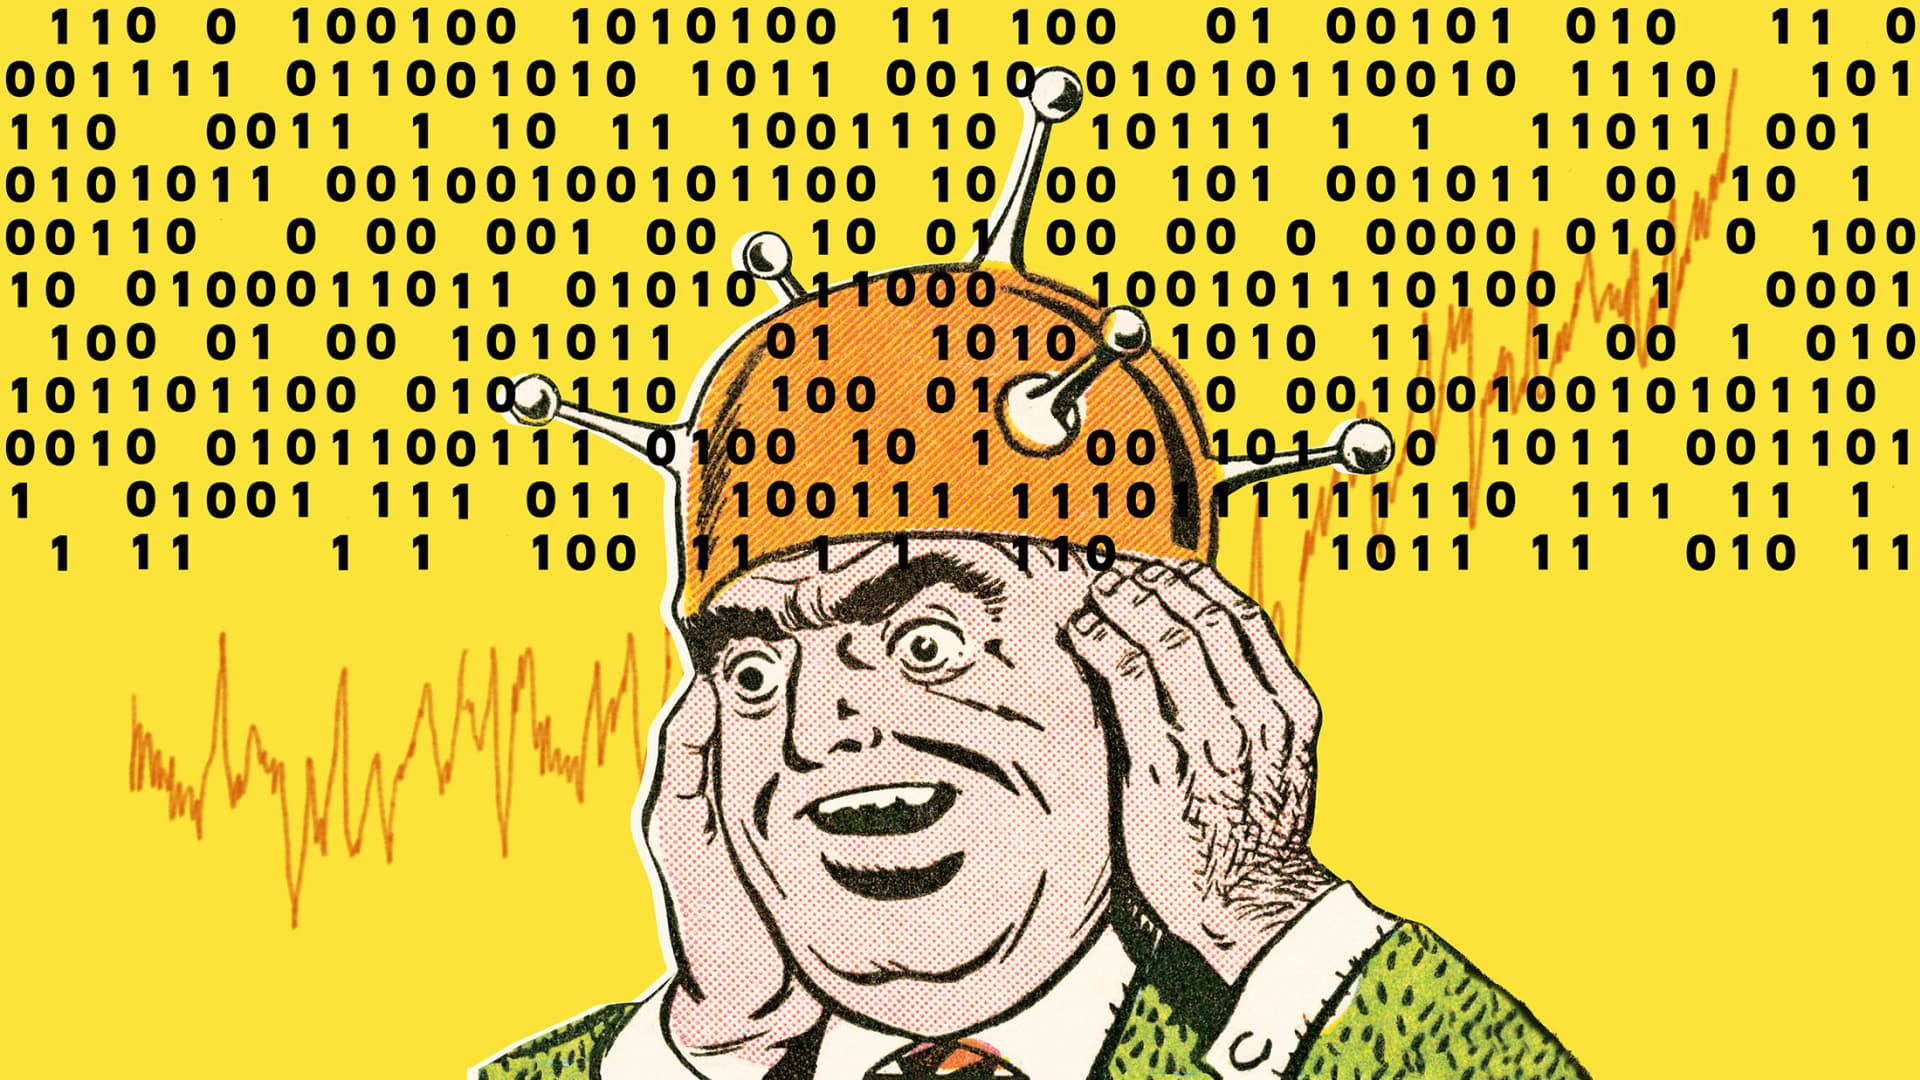 How to Move Forward When You're Feeling Overwhelmed by Data